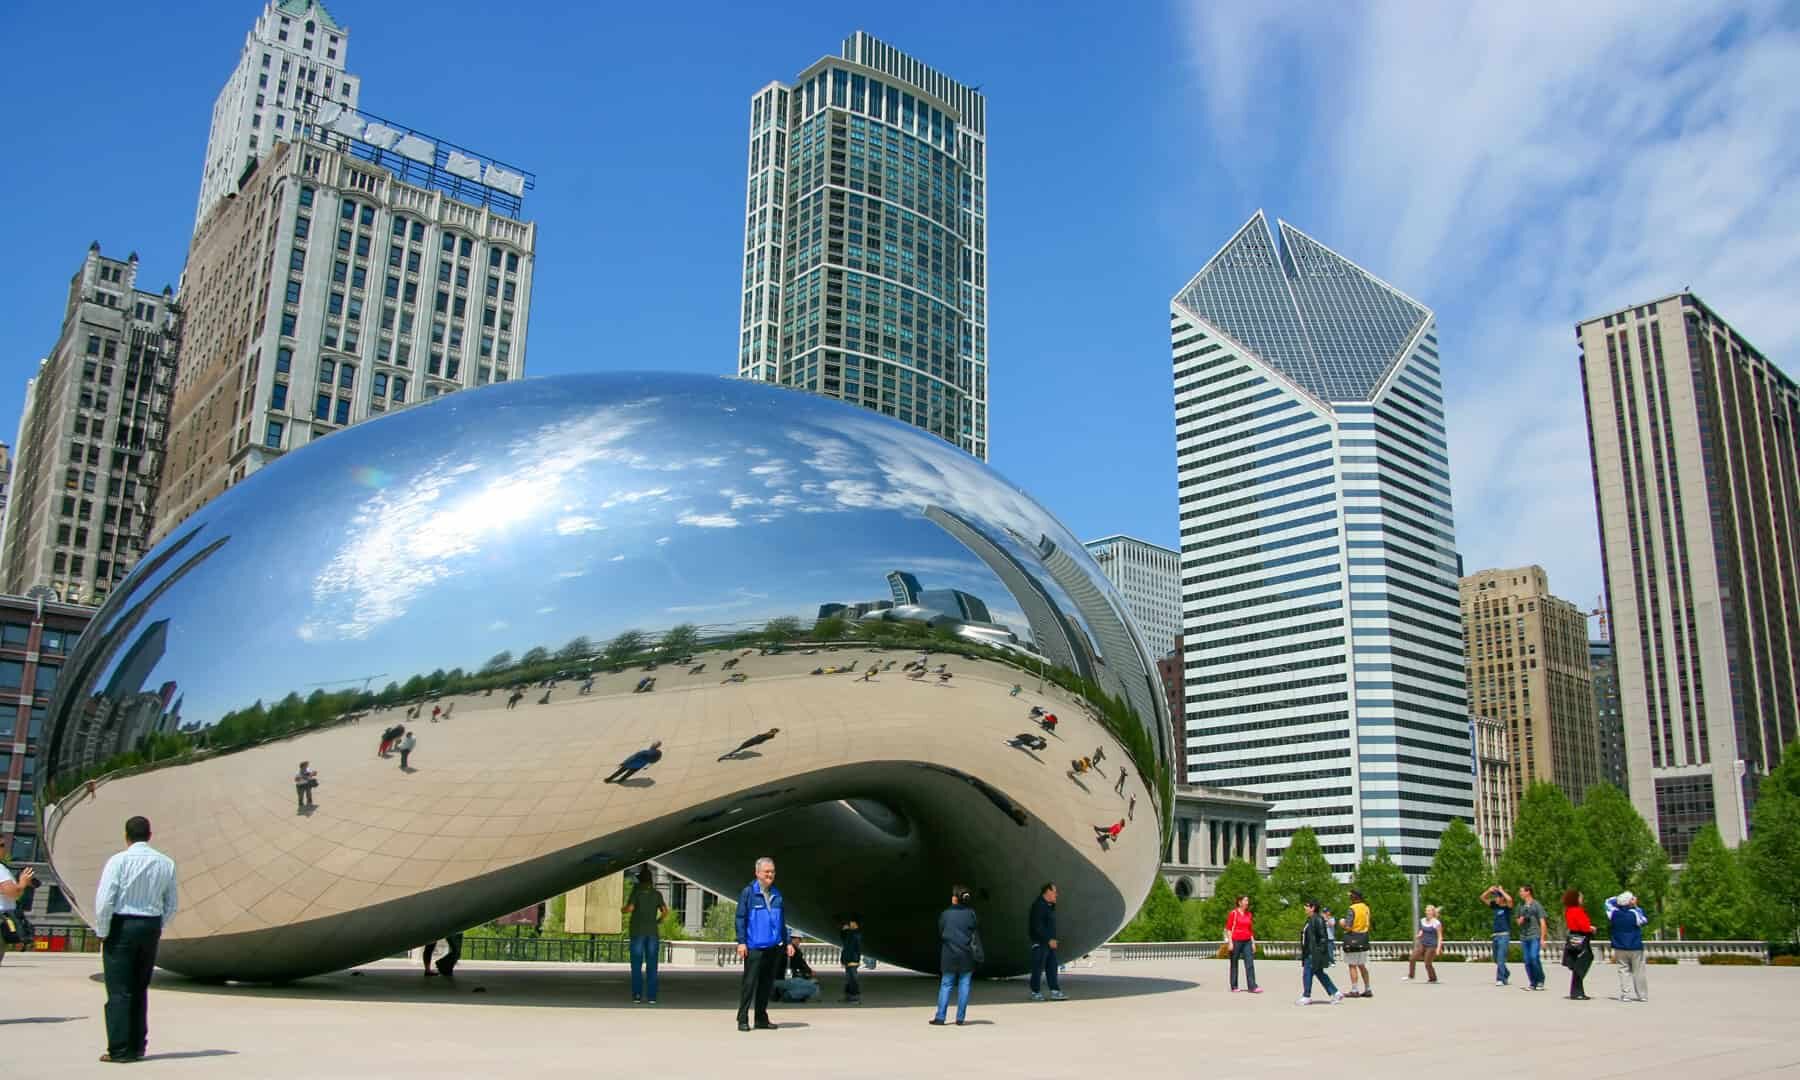 The Best Things to do in Chicago